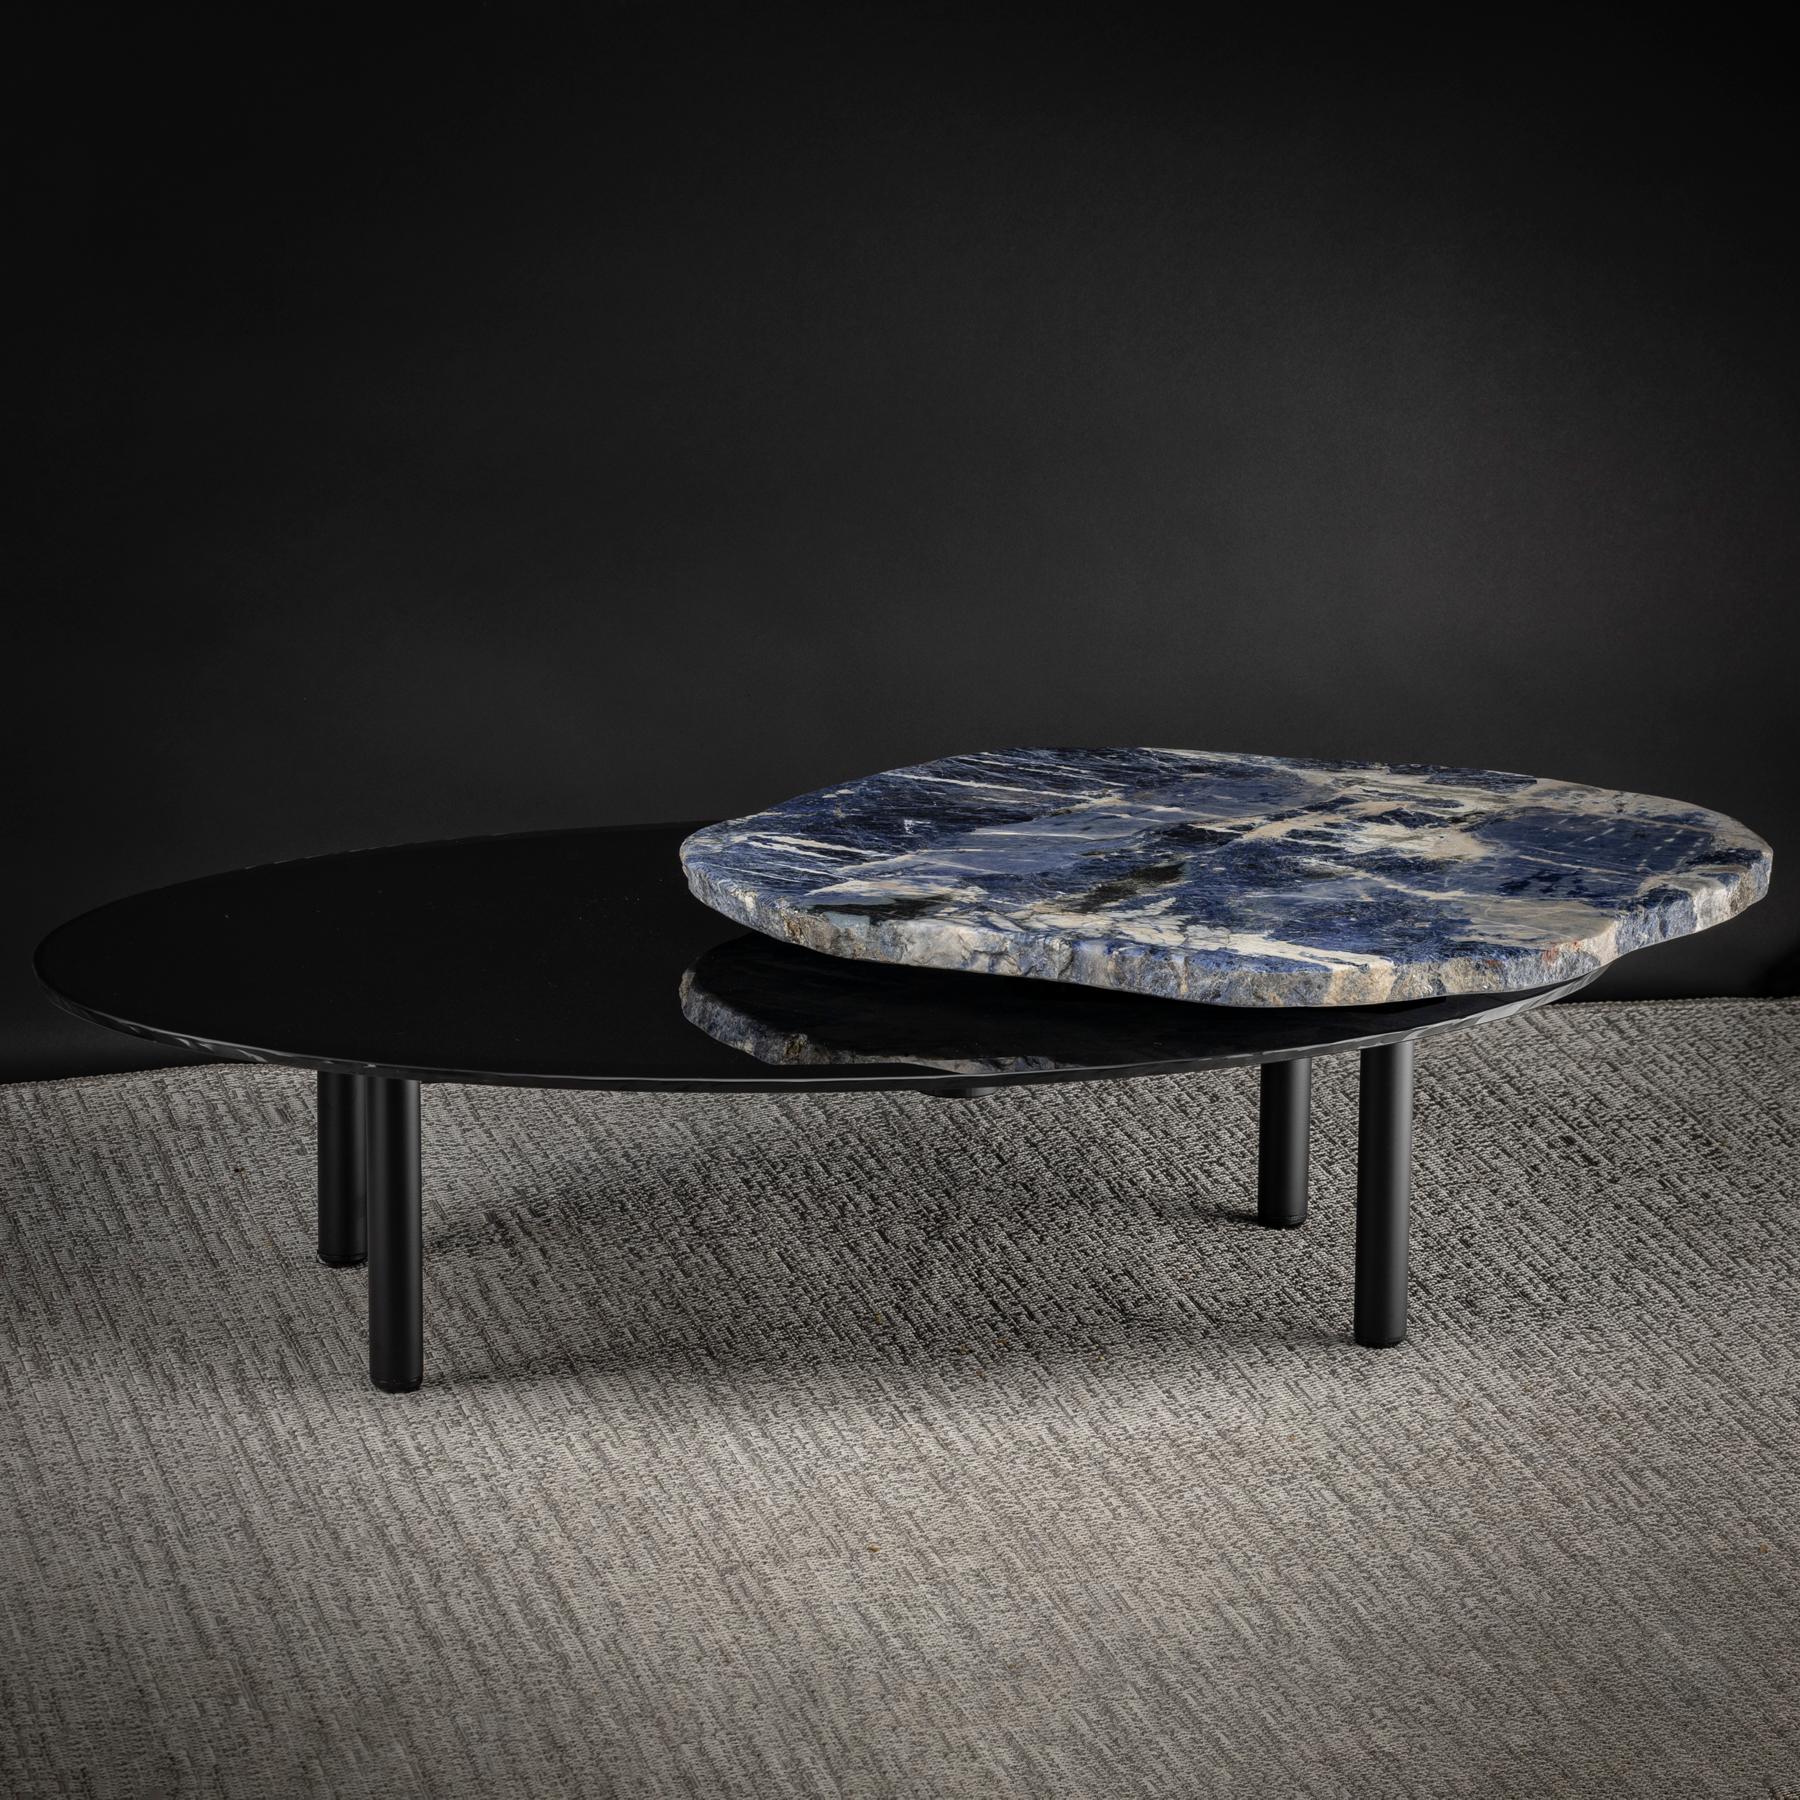 Center Table, with Rotating Brazilian Sodalite Slab on Black Tempered Glass 3